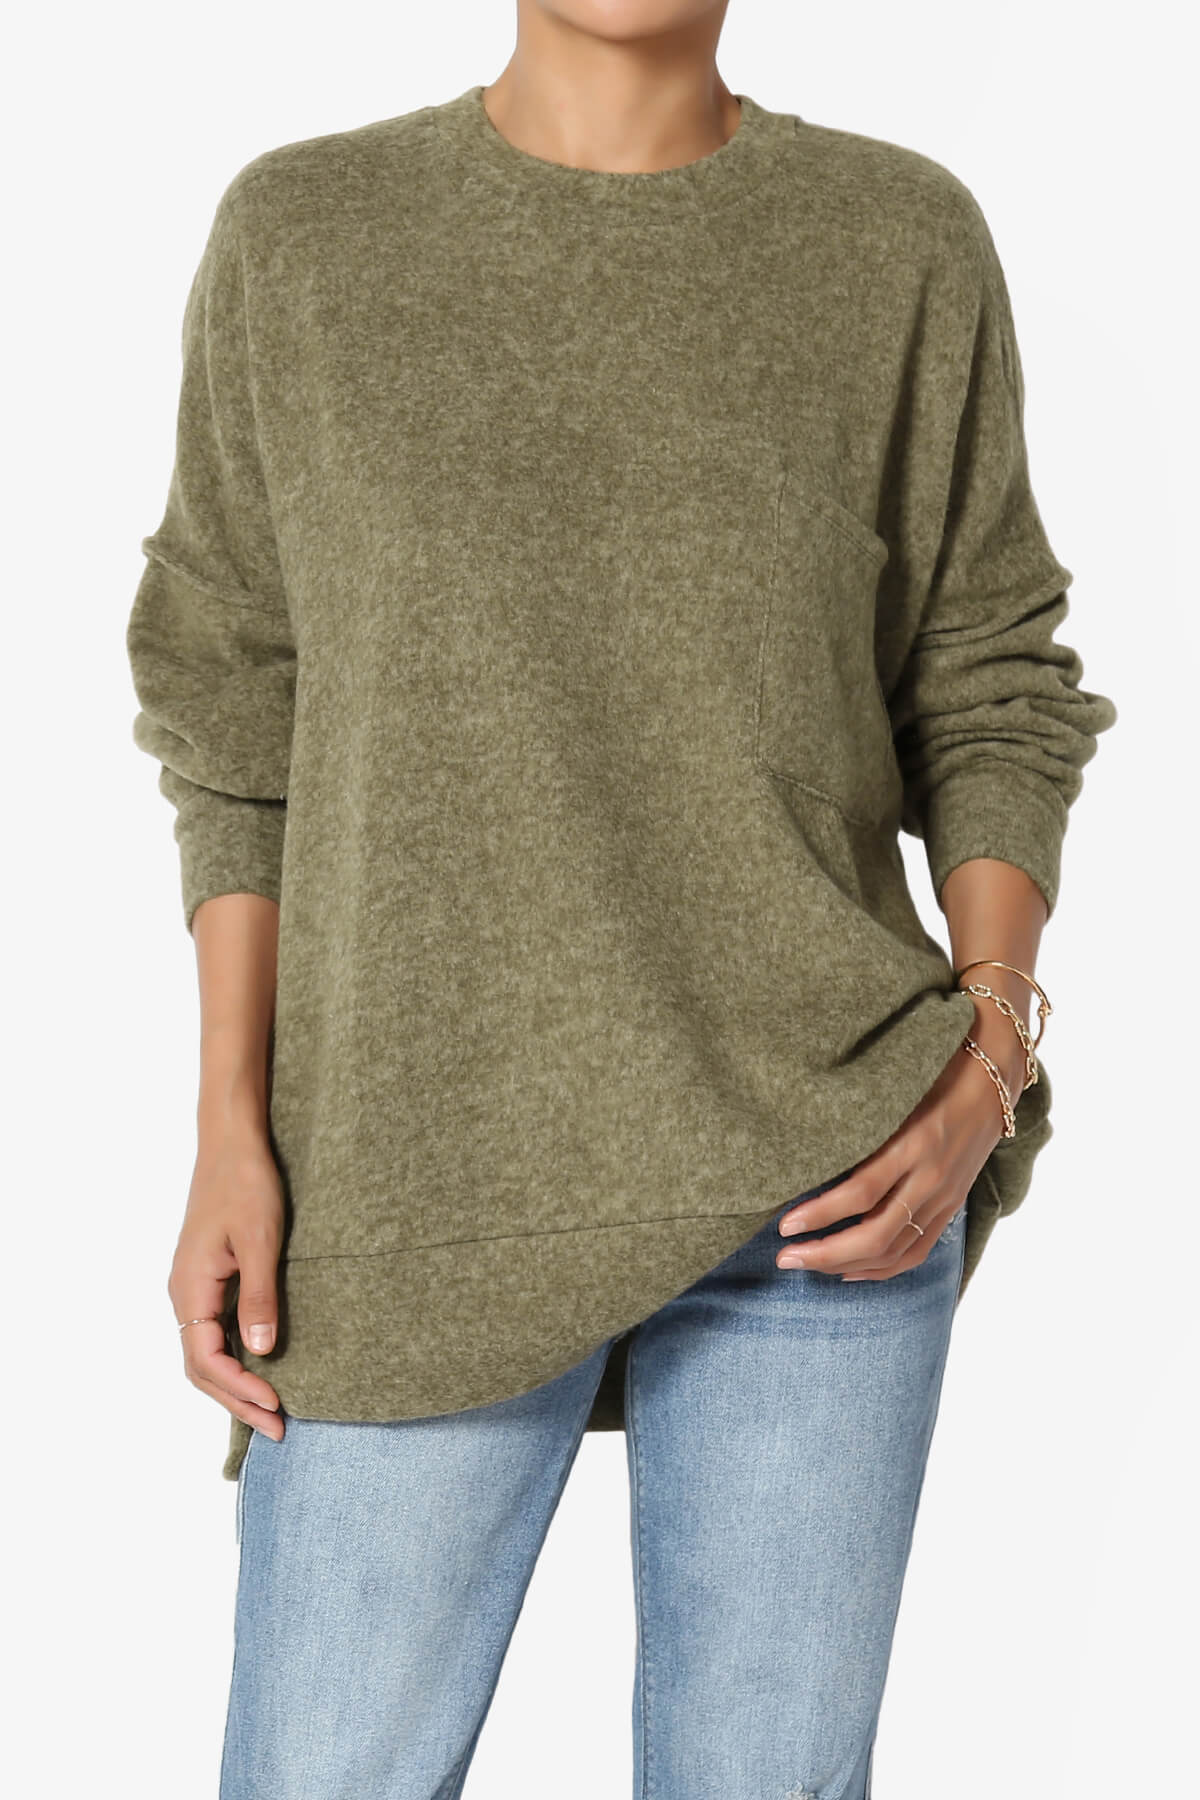 Load image into Gallery viewer, Breccan Blushed Knit Oversized Sweater OLIVE KHAKI_1
